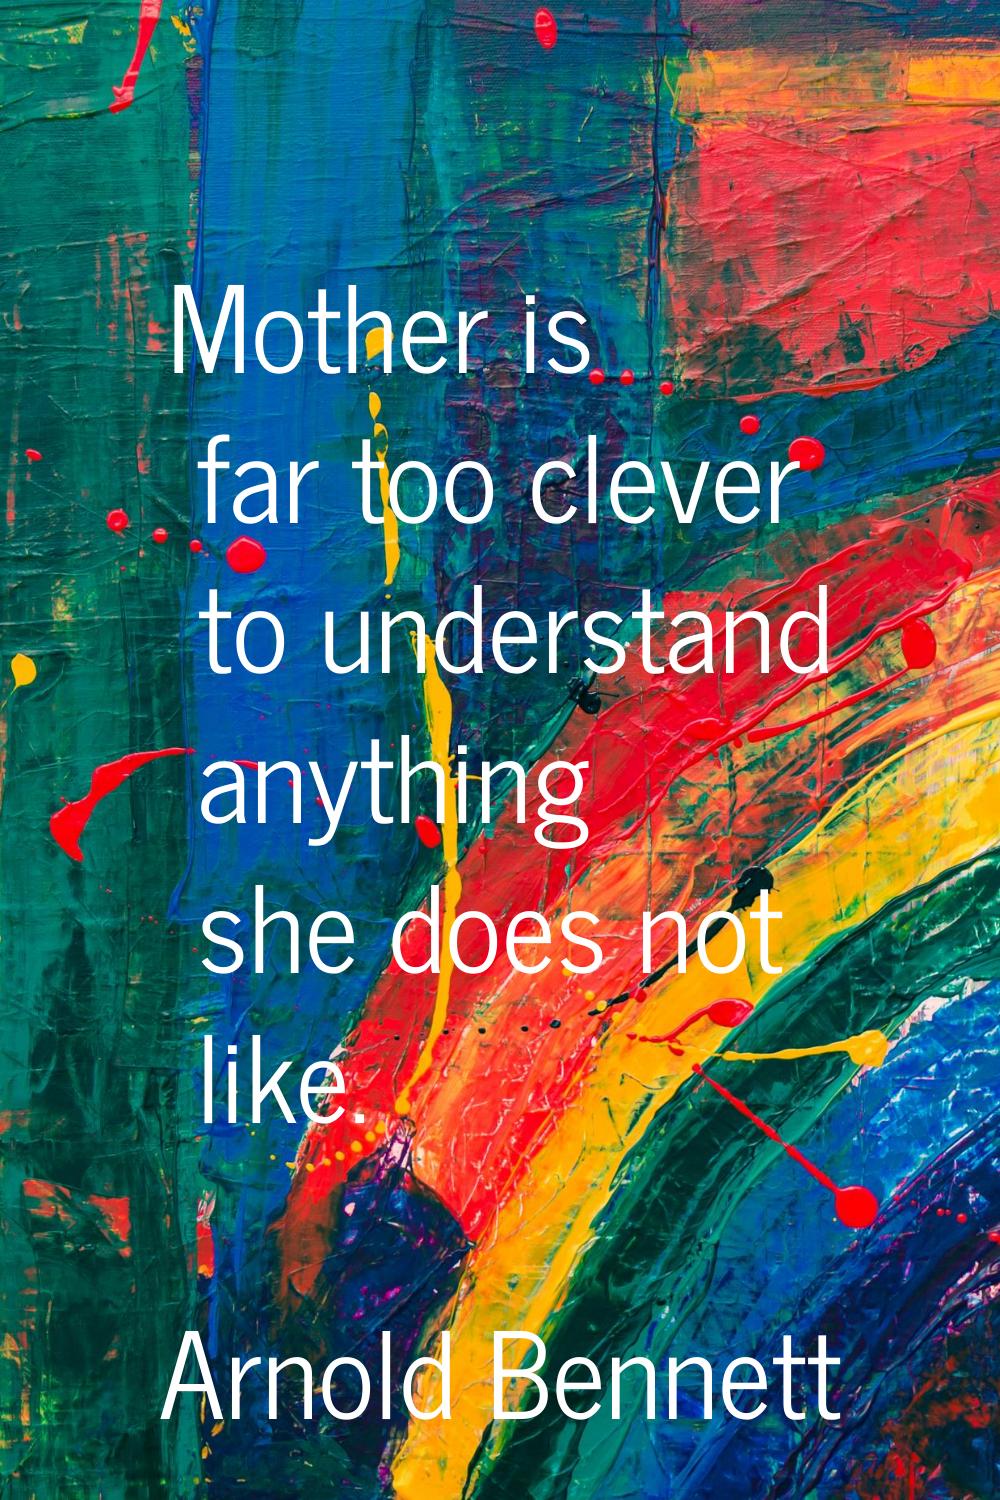 Mother is far too clever to understand anything she does not like.